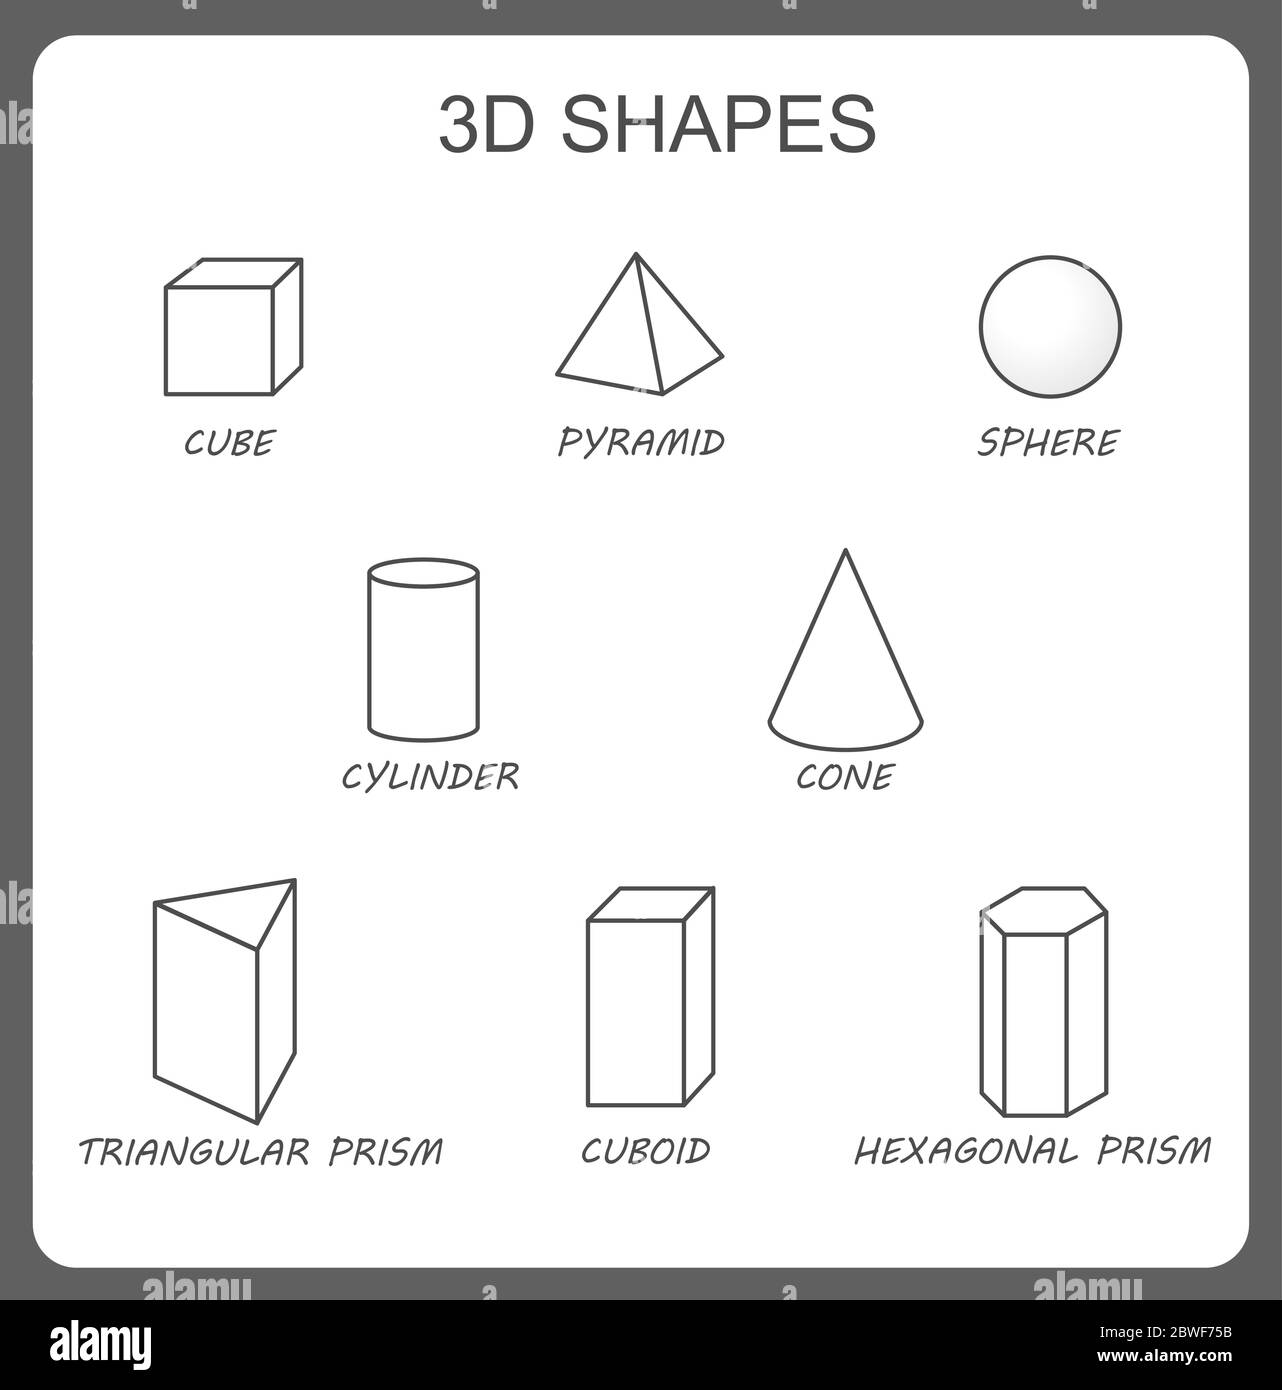 Solid 3d shapes: cylinder, cube, prism, sphere, pyramid, hexagonal prism, cone. Isolated vector solid geometric shapes. Educational geometry poster Stock Vector